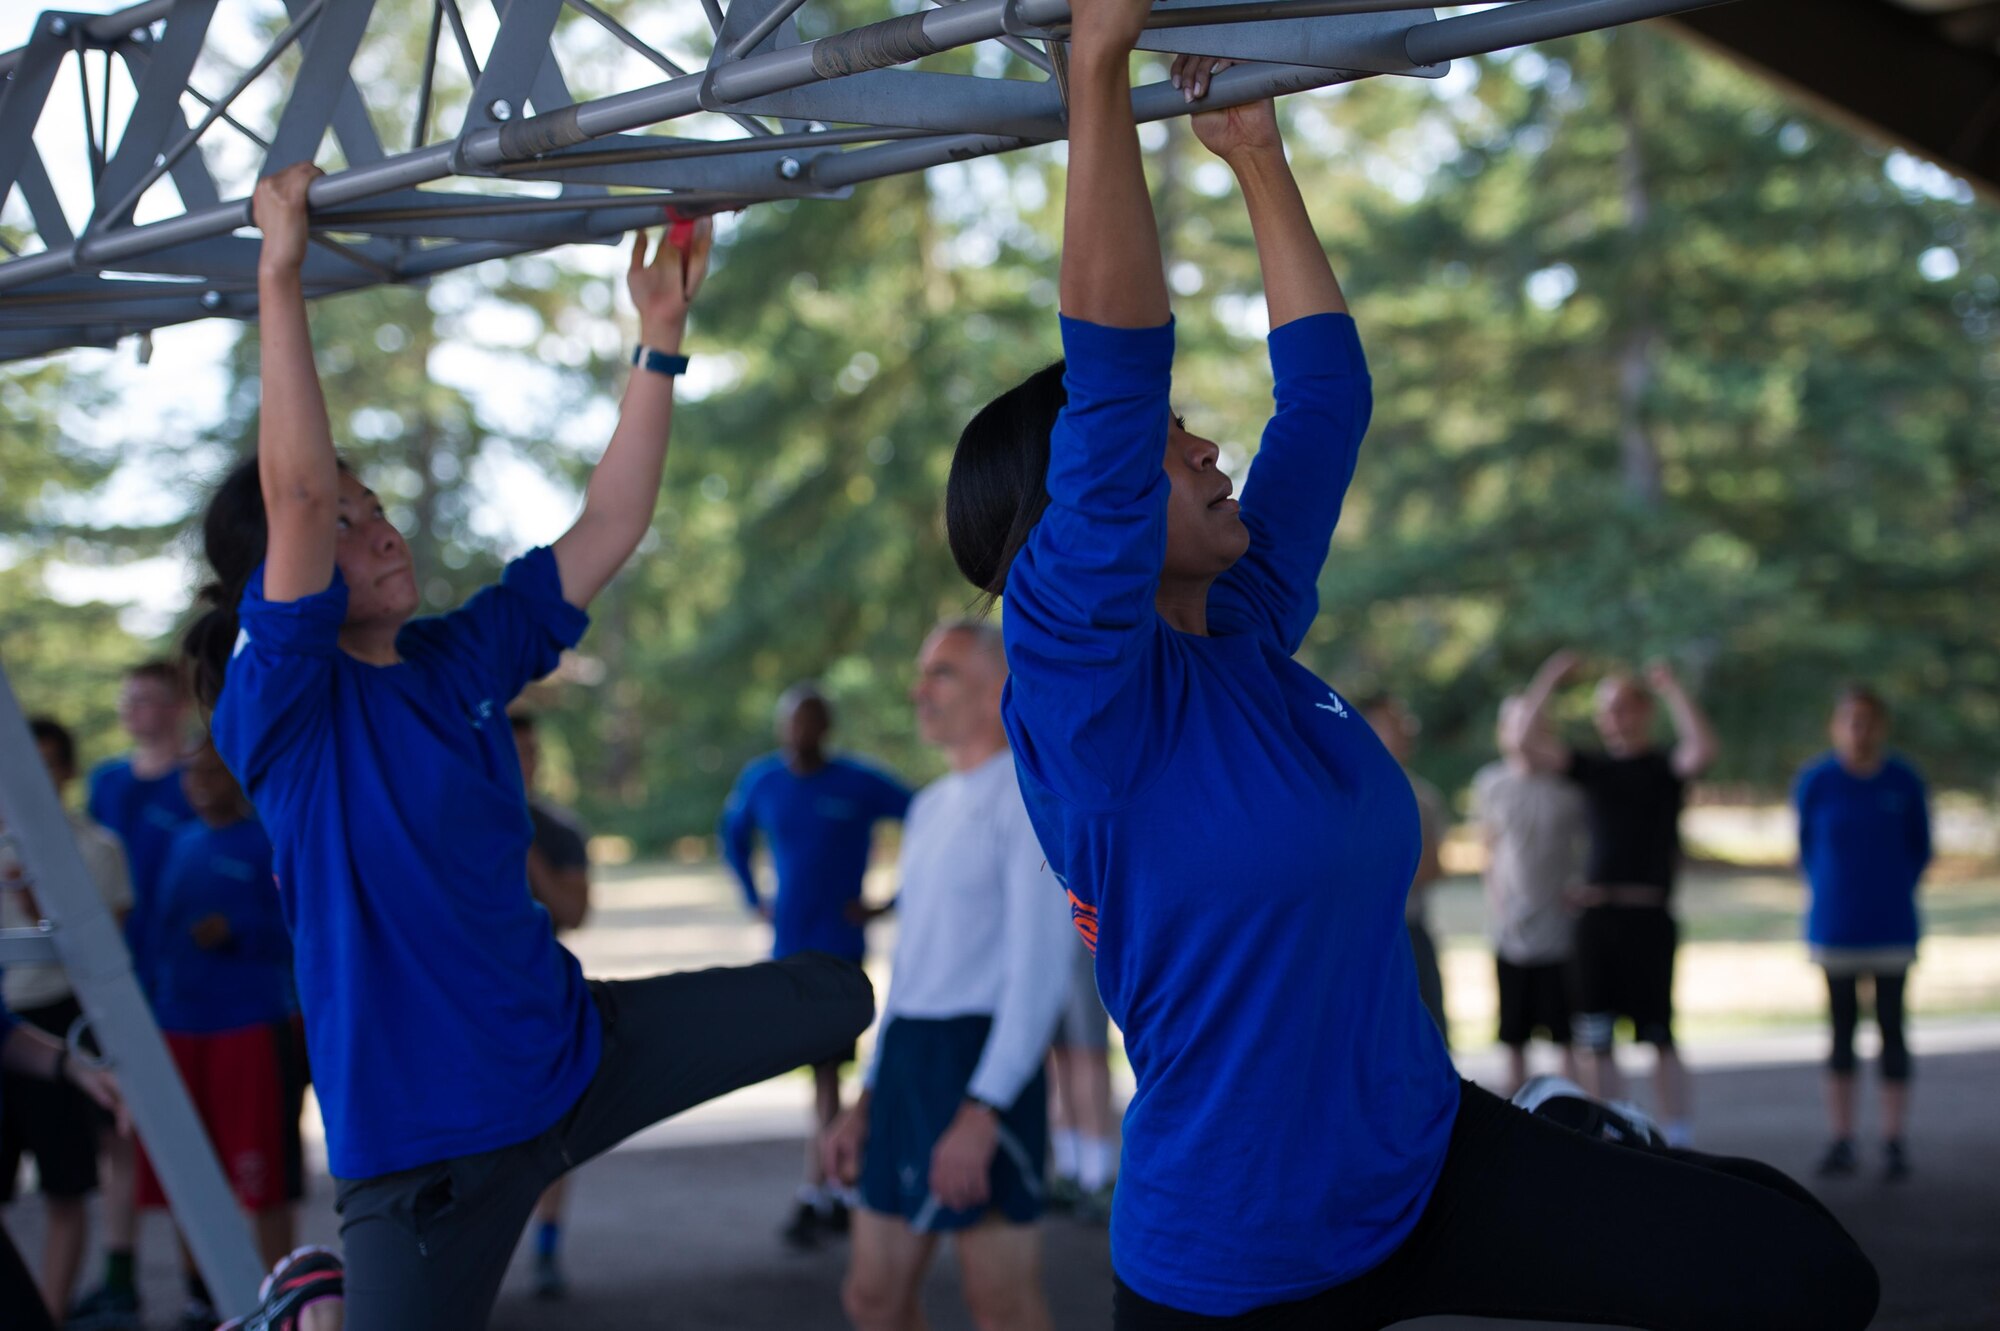 Members of the Development and Training Flight train during a physical fitness session at the McChord Field track Oct. 15. (U.S. Air Force photo by 1st Lt. Alyssa Hudyma)